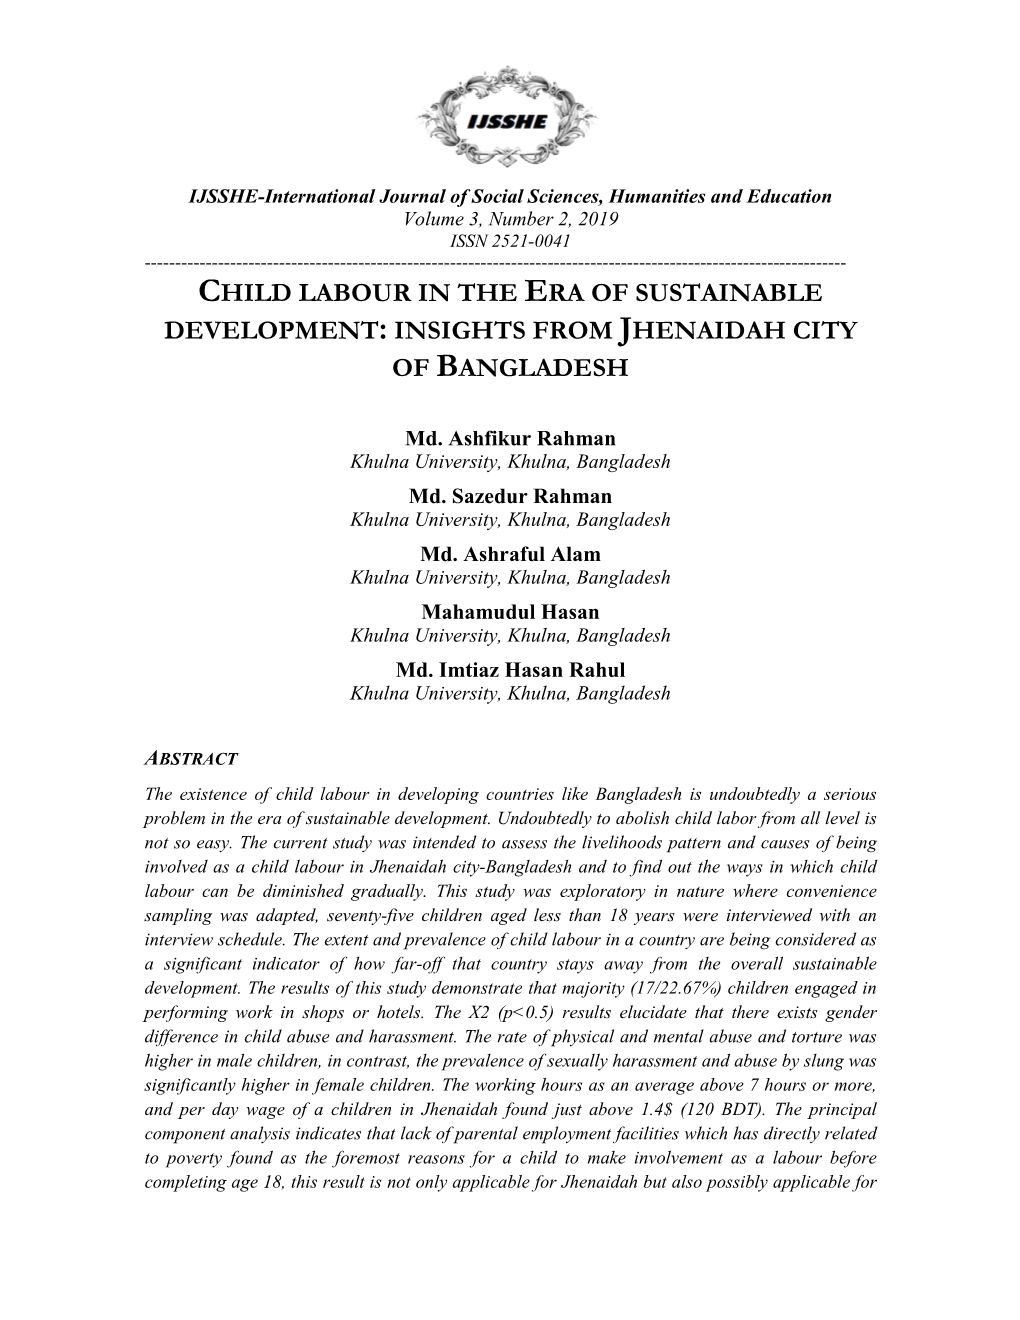 Child Labour in the Era of Sustainable Development: Insights from Jhenaidah City of Bangladesh